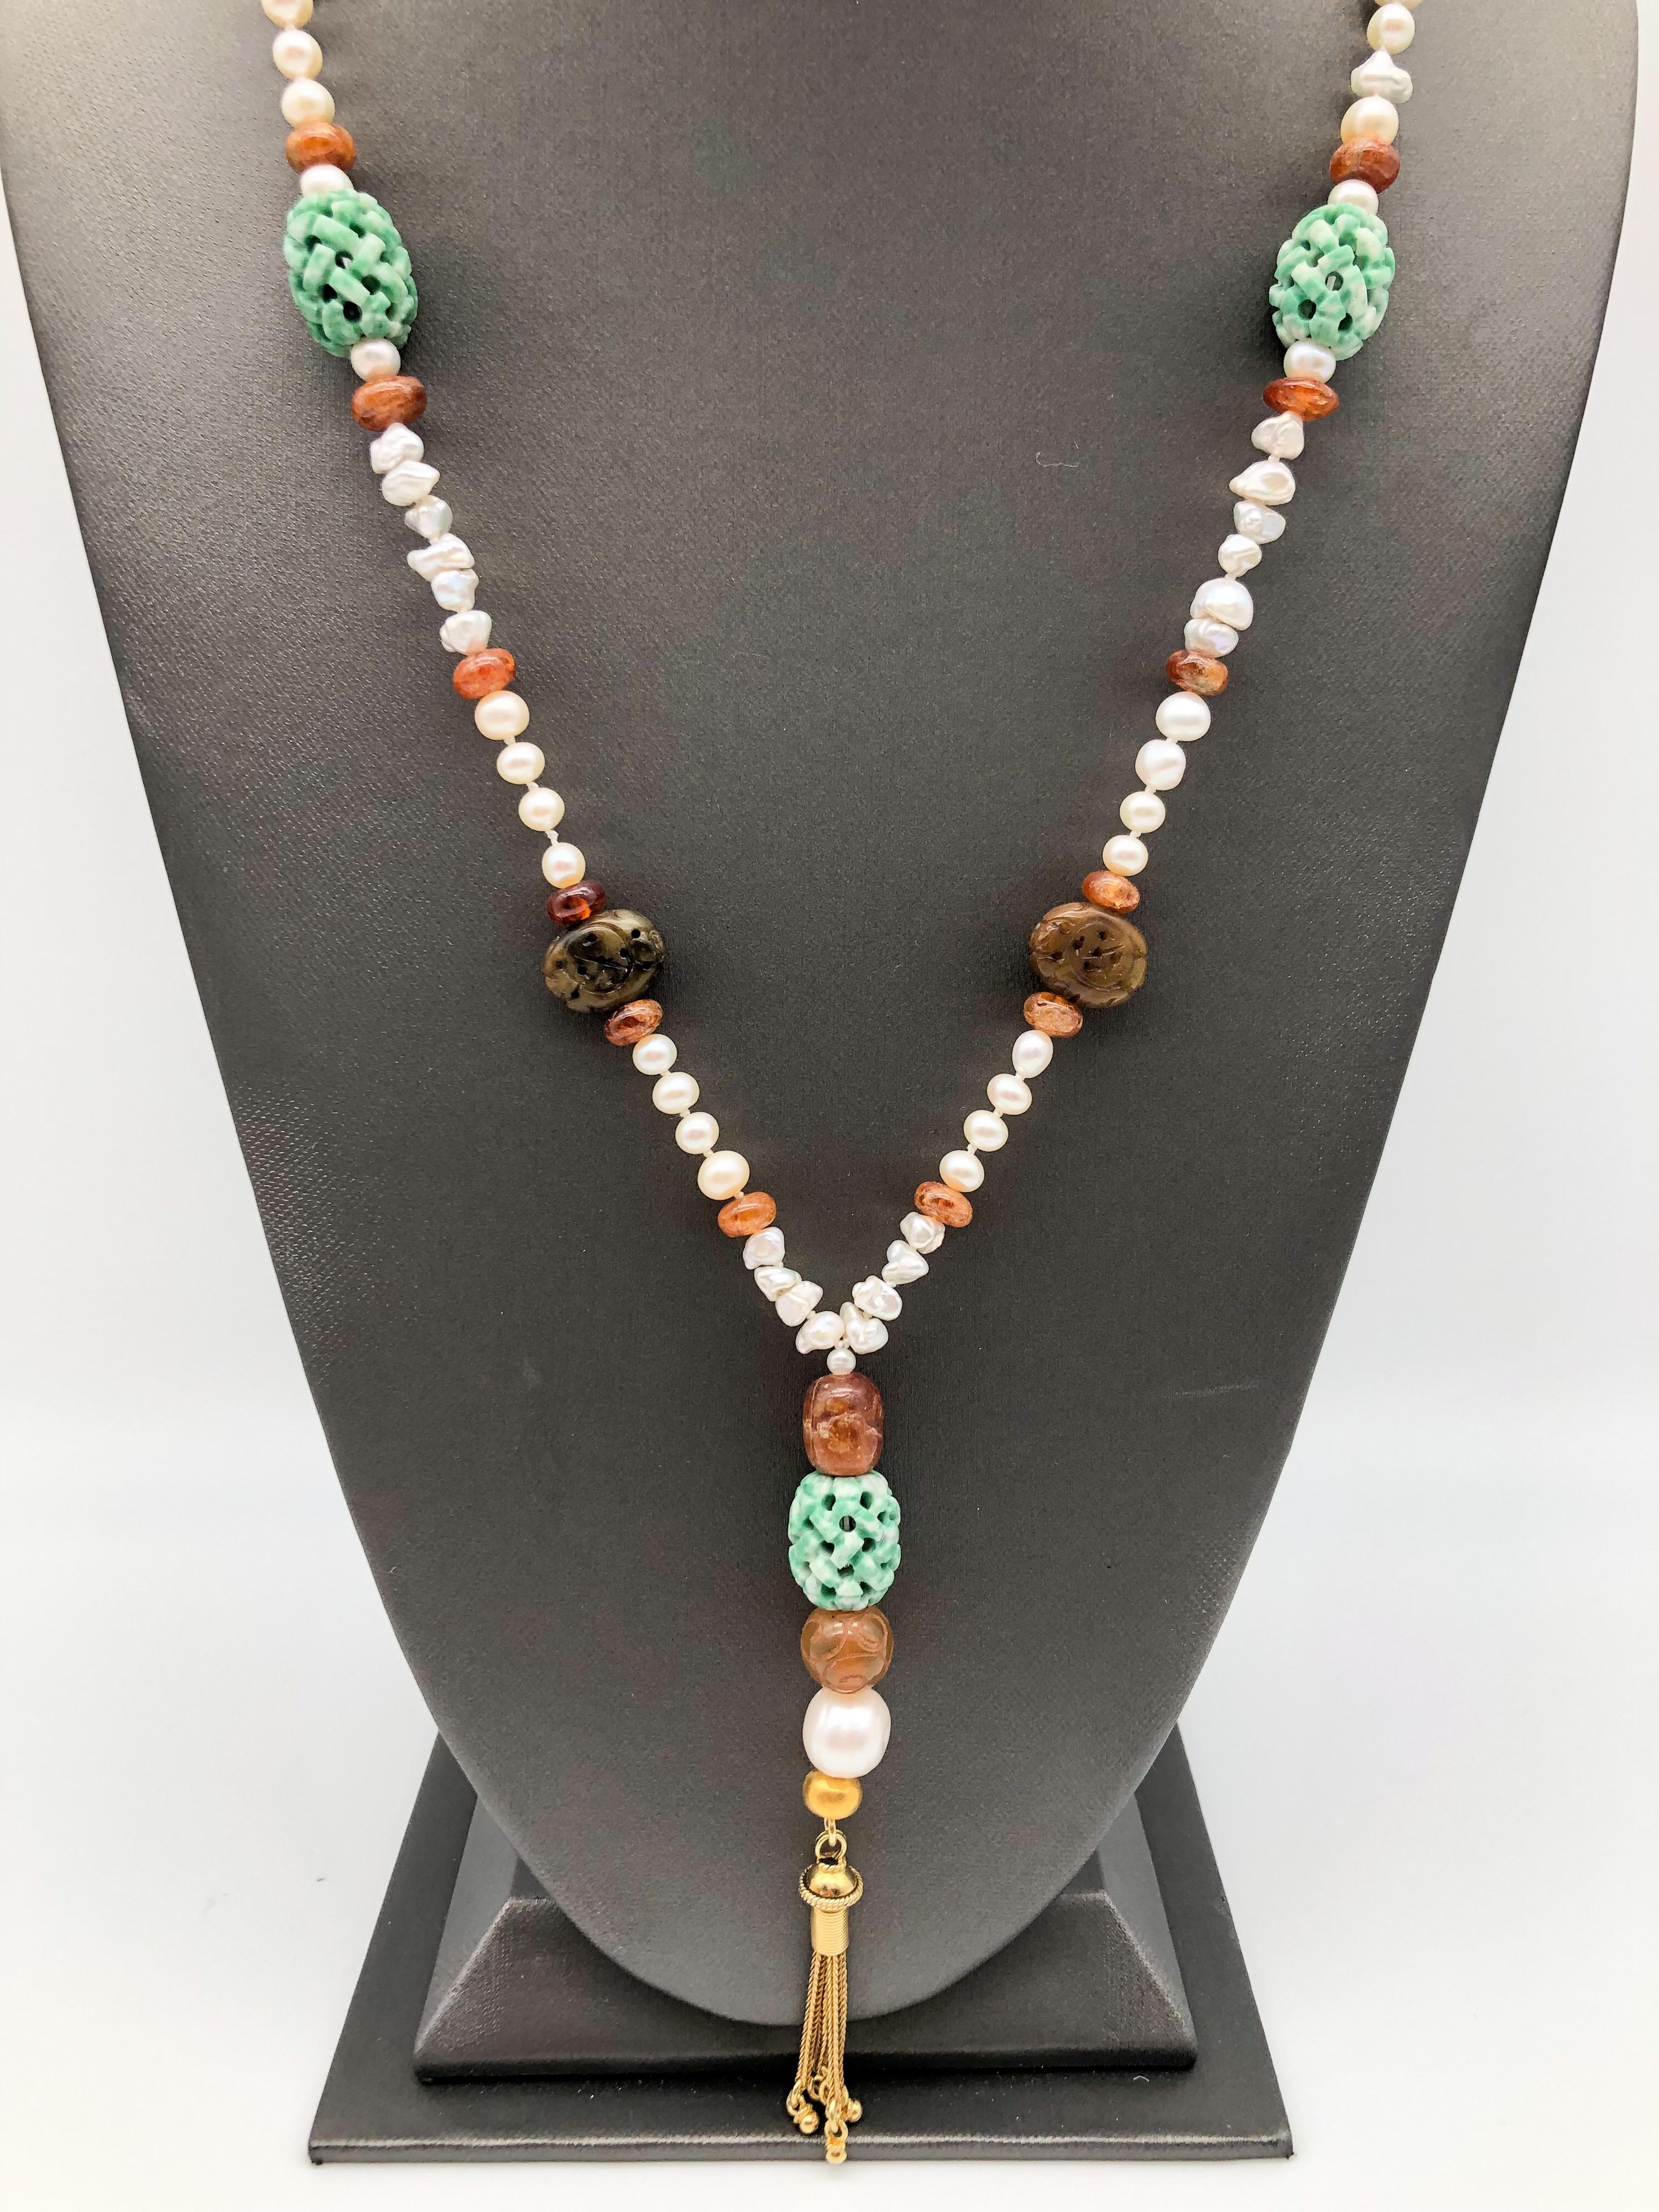 Contemporary A.Jeschel Splendid Long Pearl, Hessonite, and Tobacco Jade Necklace